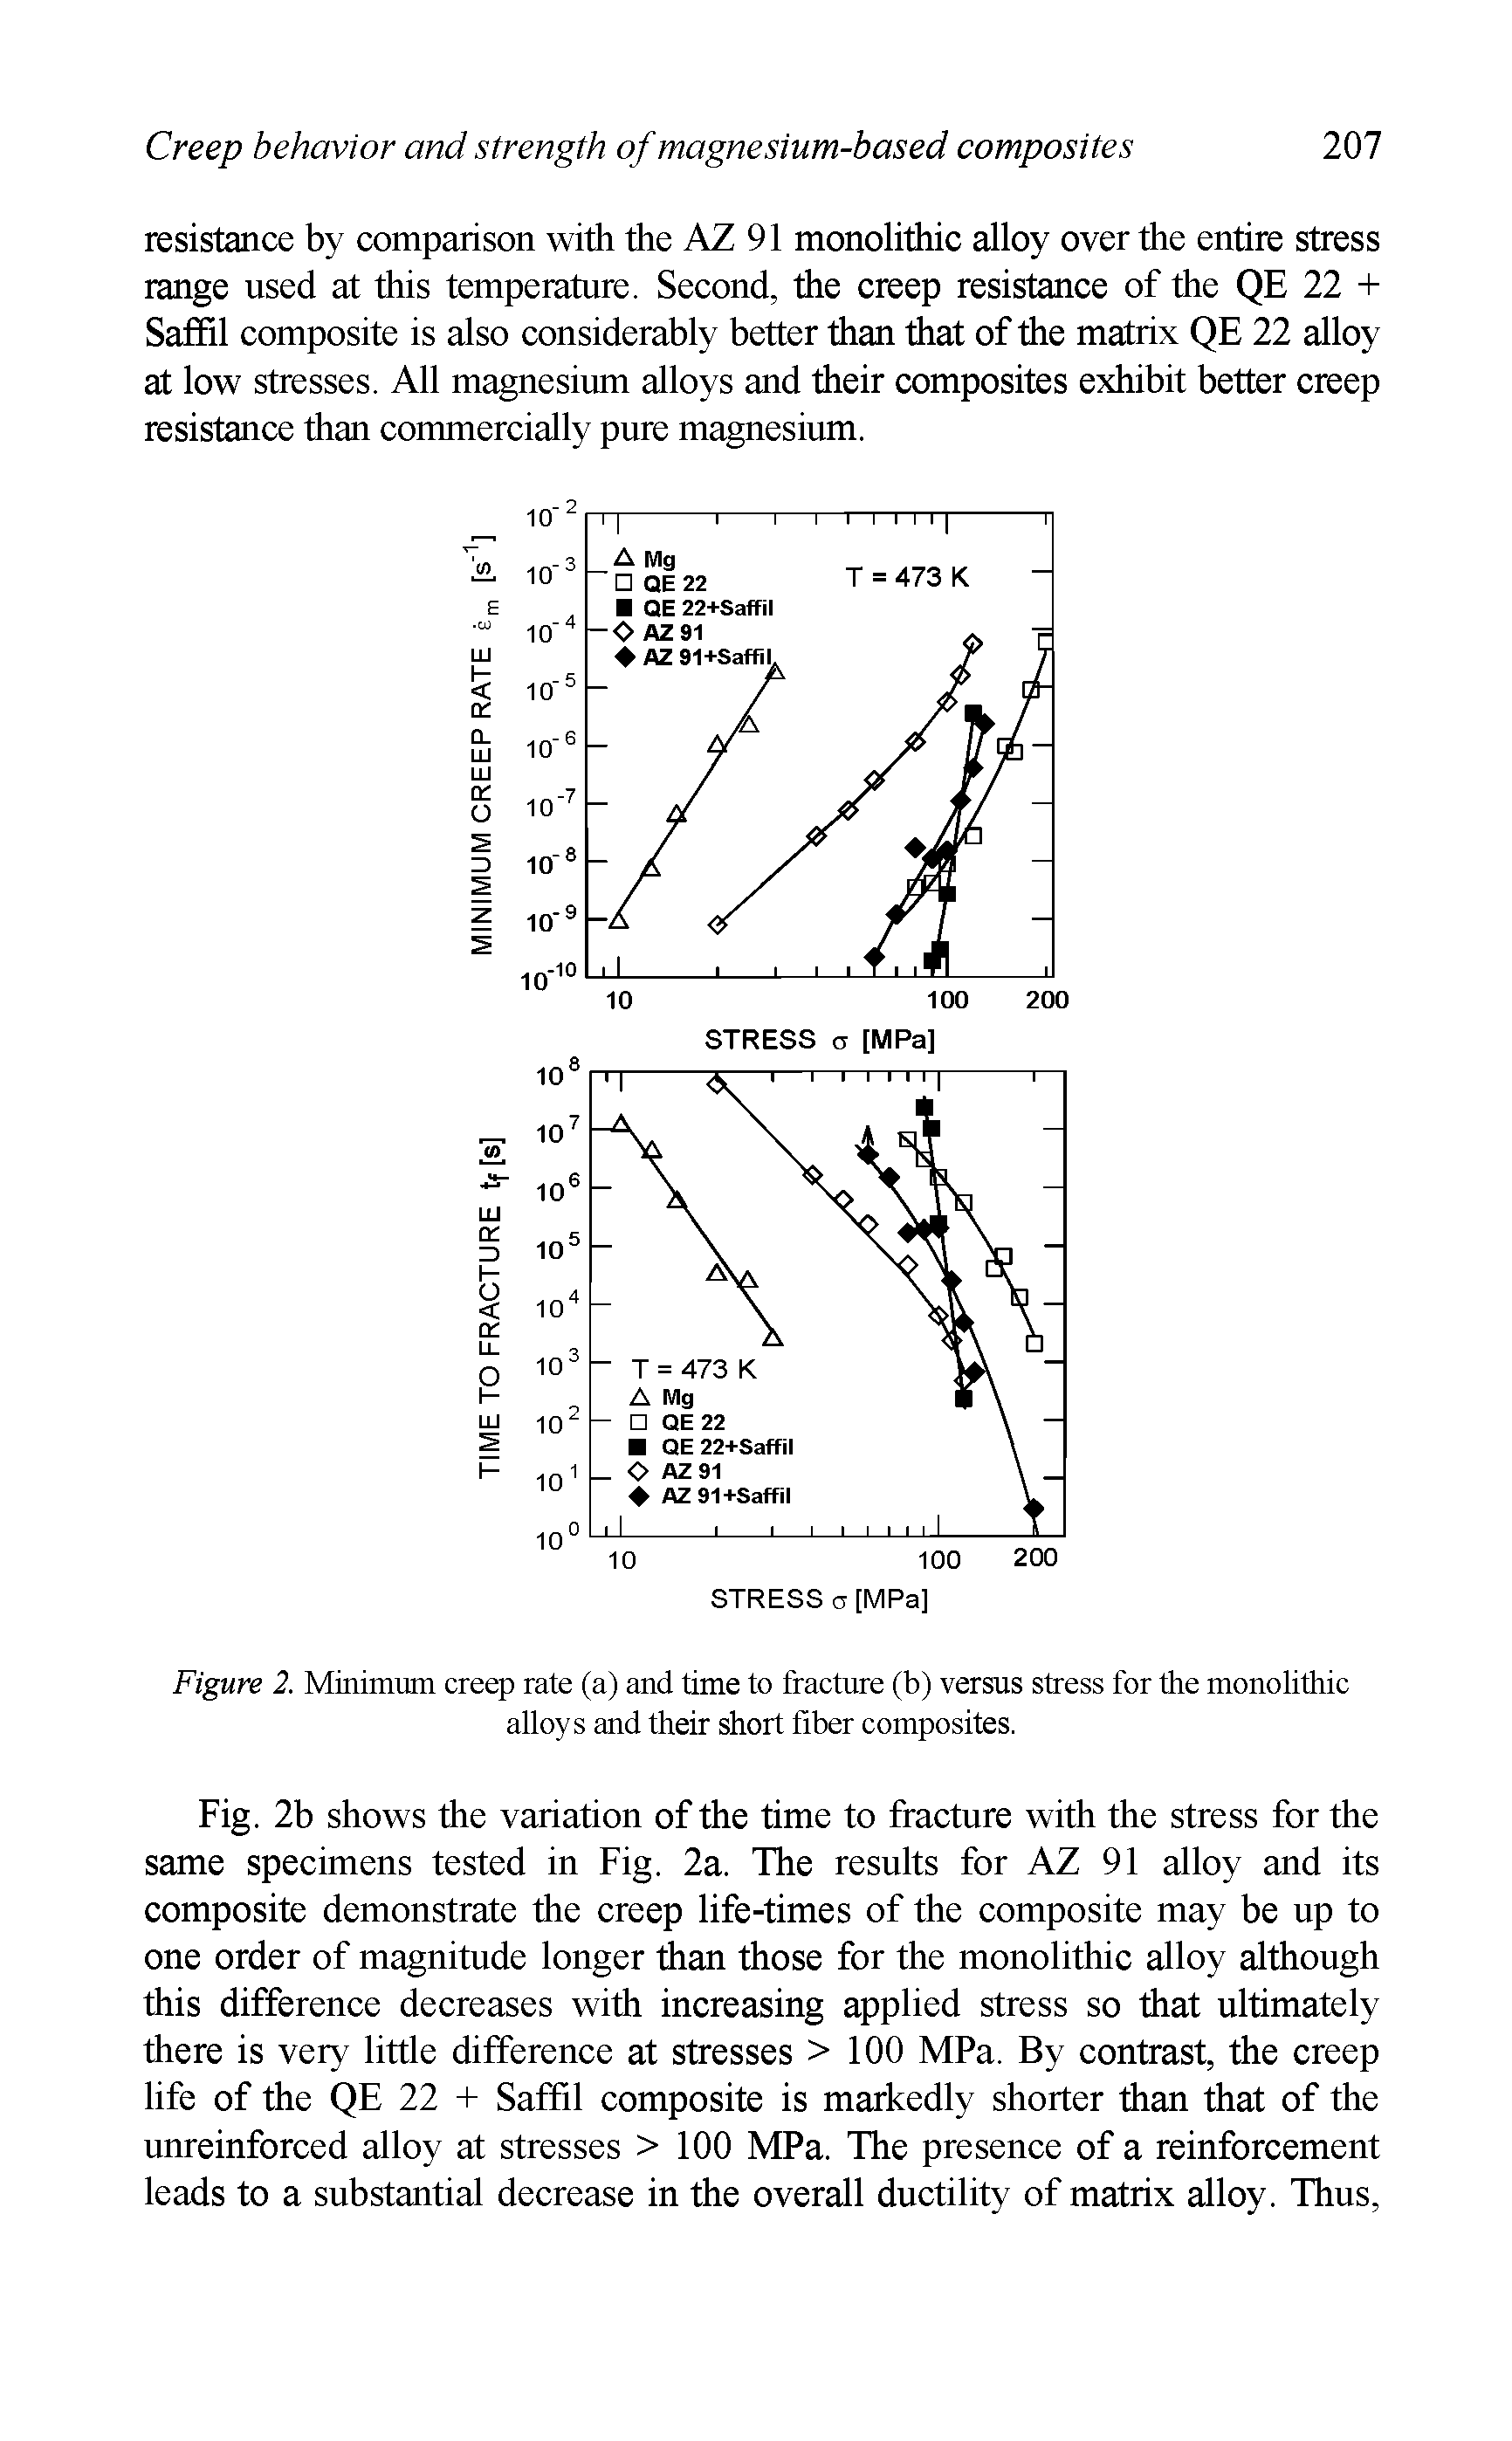 Fig. 2b shows the variation of the time to fracture with the stress for the same specimens tested in Fig. 2a. The results for AZ 91 alloy and its composite demonstrate the creep life-times of the composite may be up to one order of magnitude longer than those for the monolithic alloy although this difference decreases with increasing applied stress so that ultimately there is very little difference at stresses >100 MPa. By contrast, the creep life of the QE 22 + Saffil composite is markedly shorter than that of the unreinforced alloy at stresses > 100 MPa. The presence of a reinforcement leads to a substantial decrease in the overall ductility of matrix alloy. Thus,...